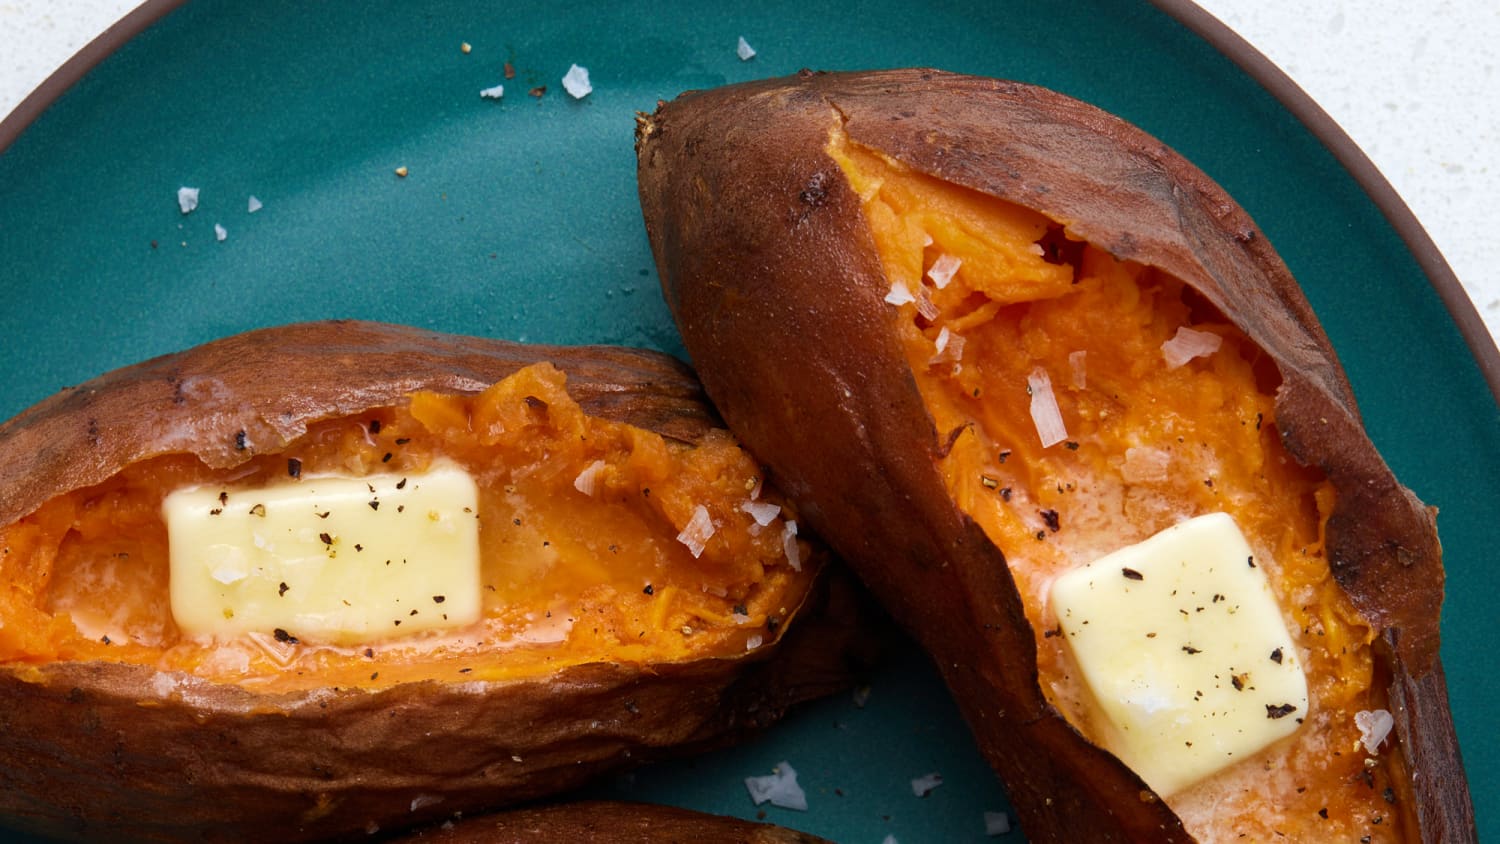 The Best and Quickest Baked Sweet Potatoes - Live Simply